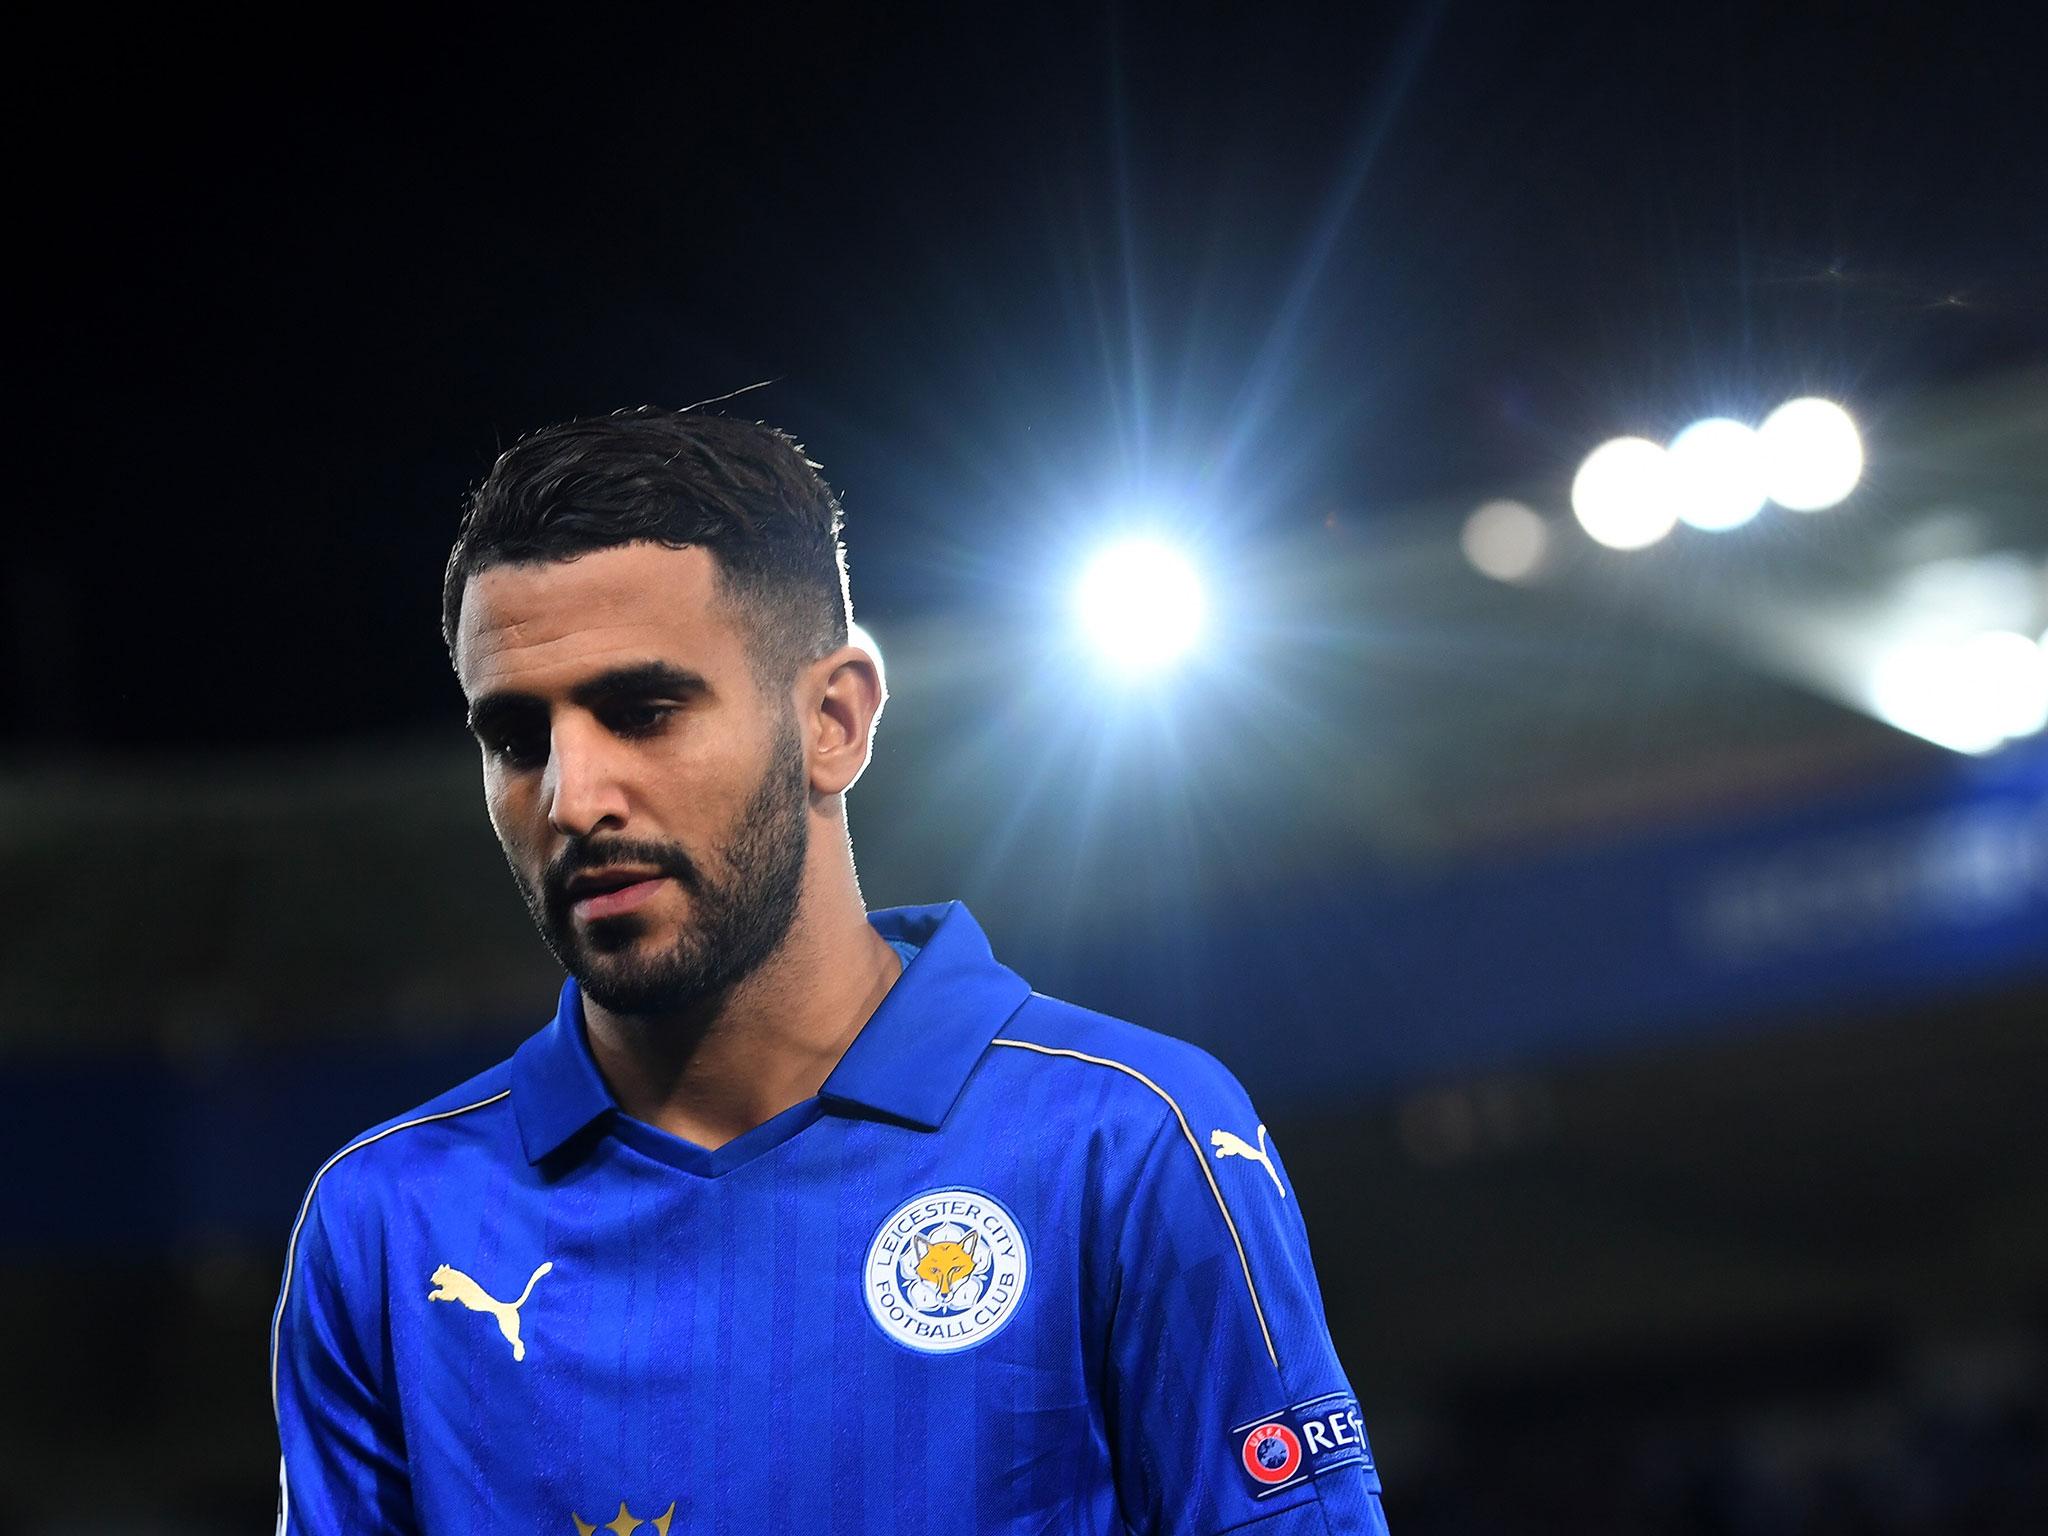 The Algerian winger has struggled to regain the form that saw him crowned PFA Player of the Year last season